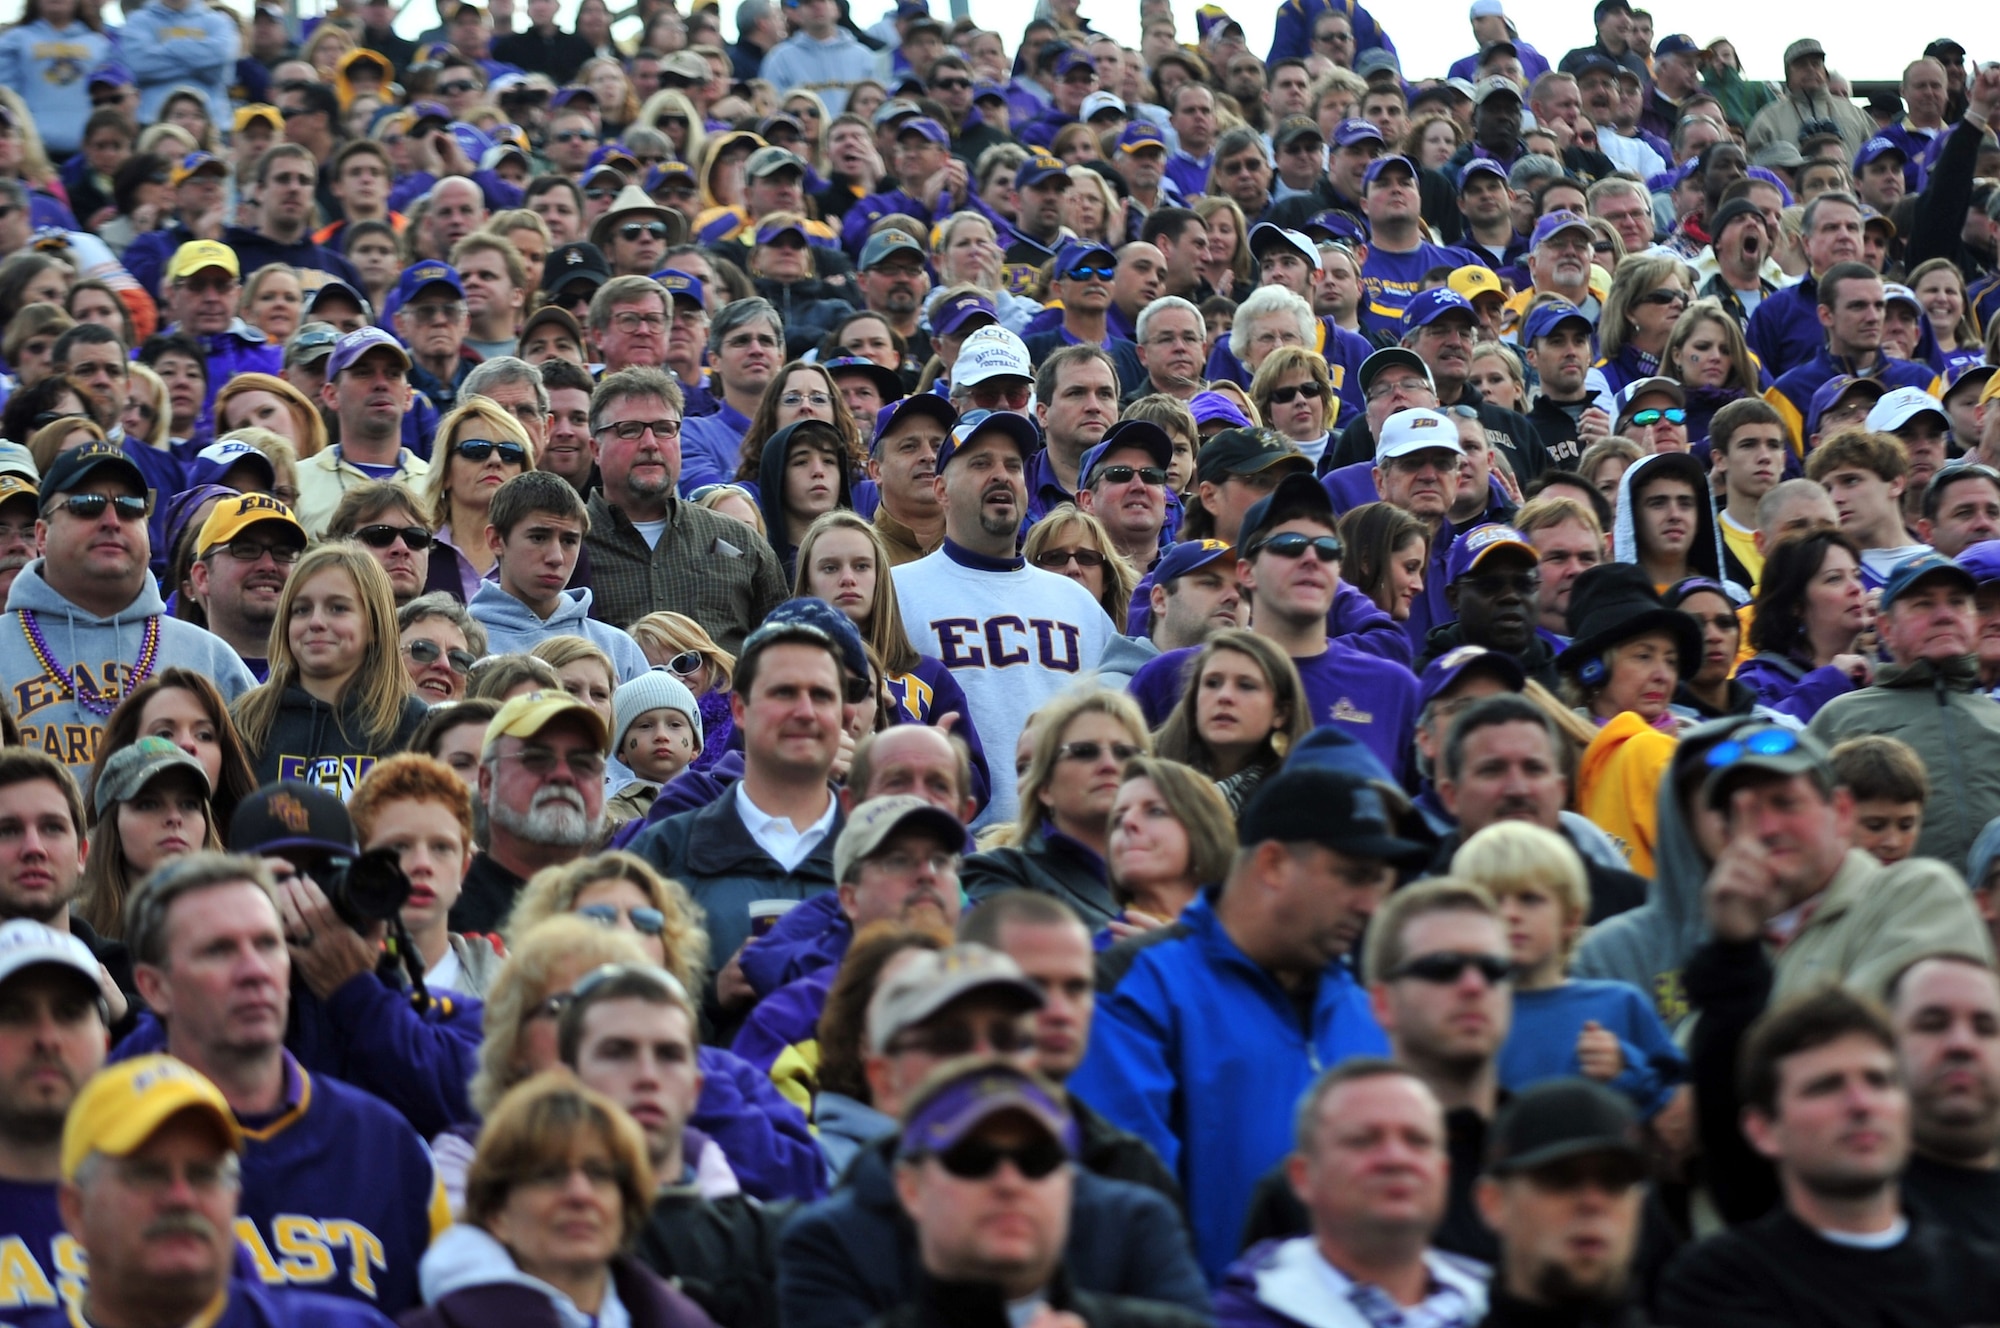 A sea of purple and gold fills the East Carolina University Dowdy-Ficklen Stadium on Military Appreciation Day Nov. 21, 2009. The home of the ECU Pirates is located in Greenville, N.C., about an hour away from Seymour Johnson Air Force Base in Goldsboro, N.C. (U.S. Air Force photo/Airman 1st Class Rae Perry)